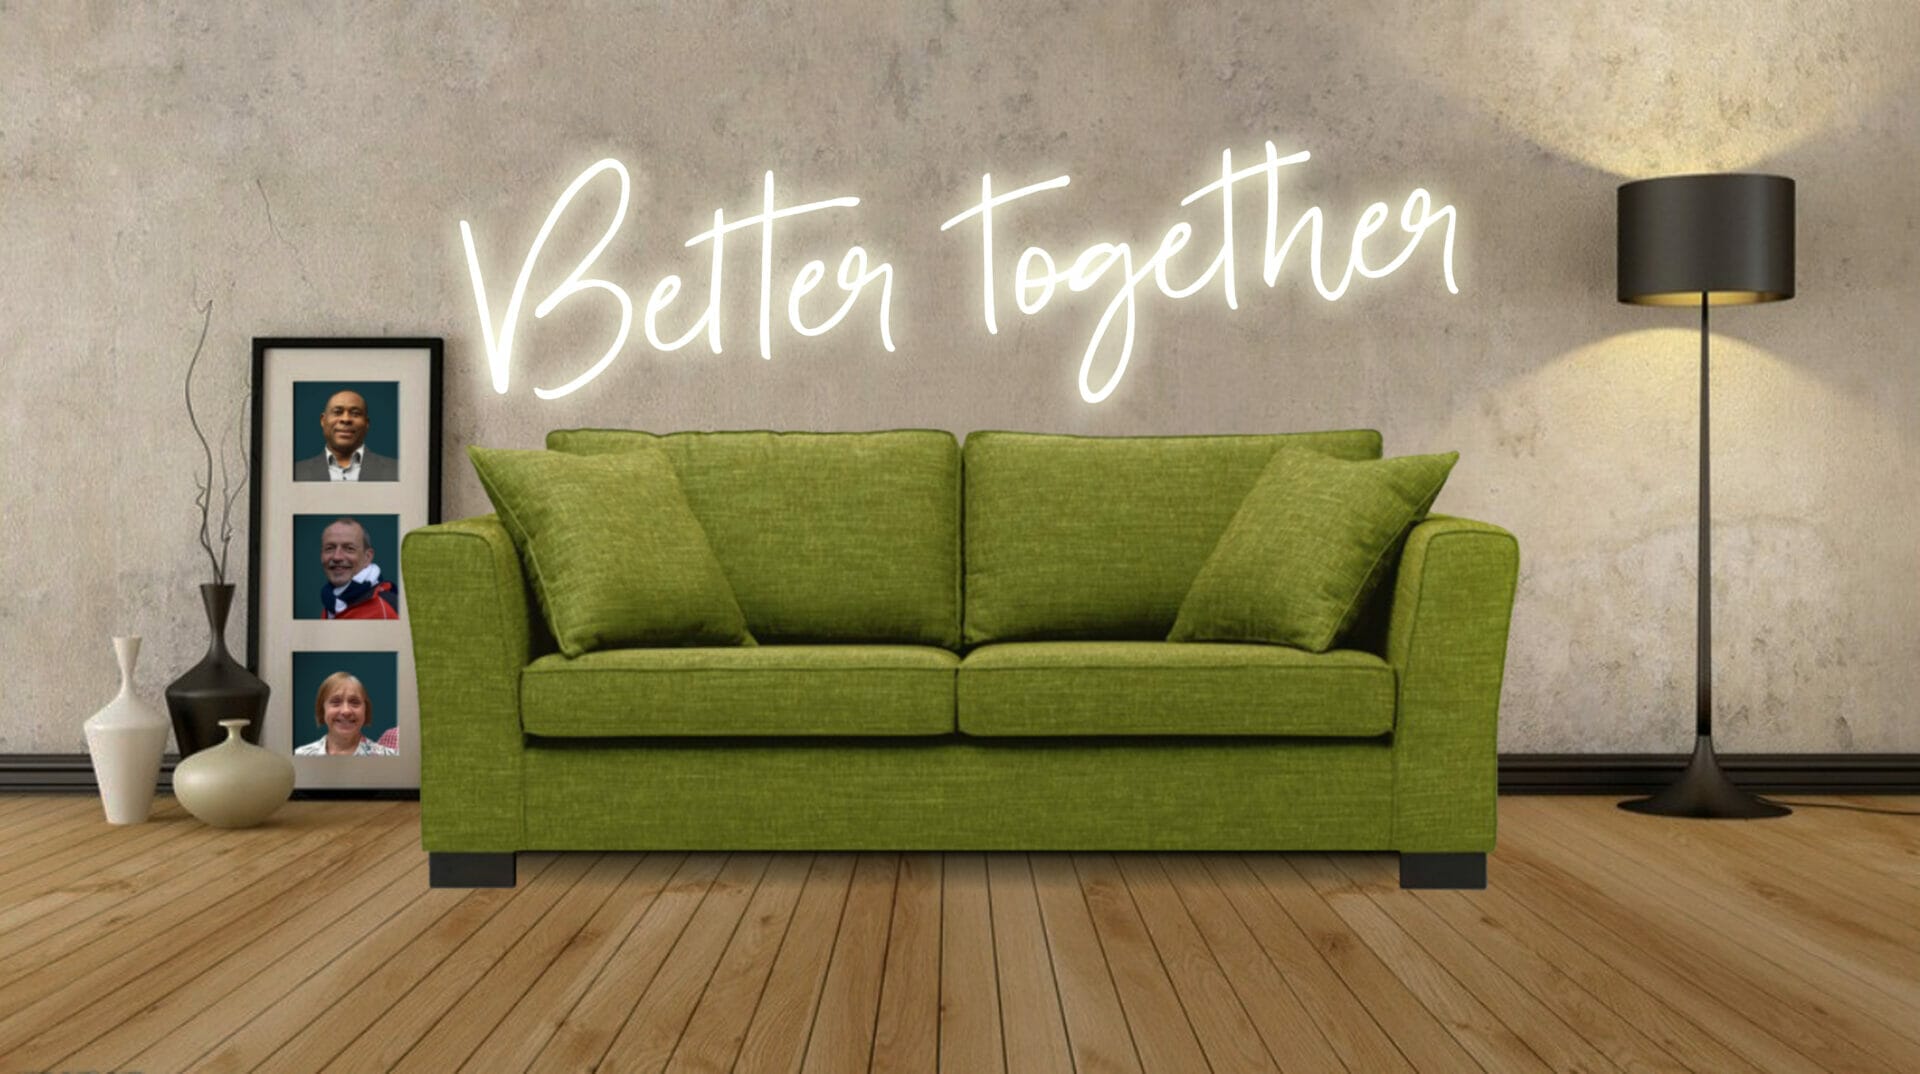 ‘Better Together’ – Community with One-Another